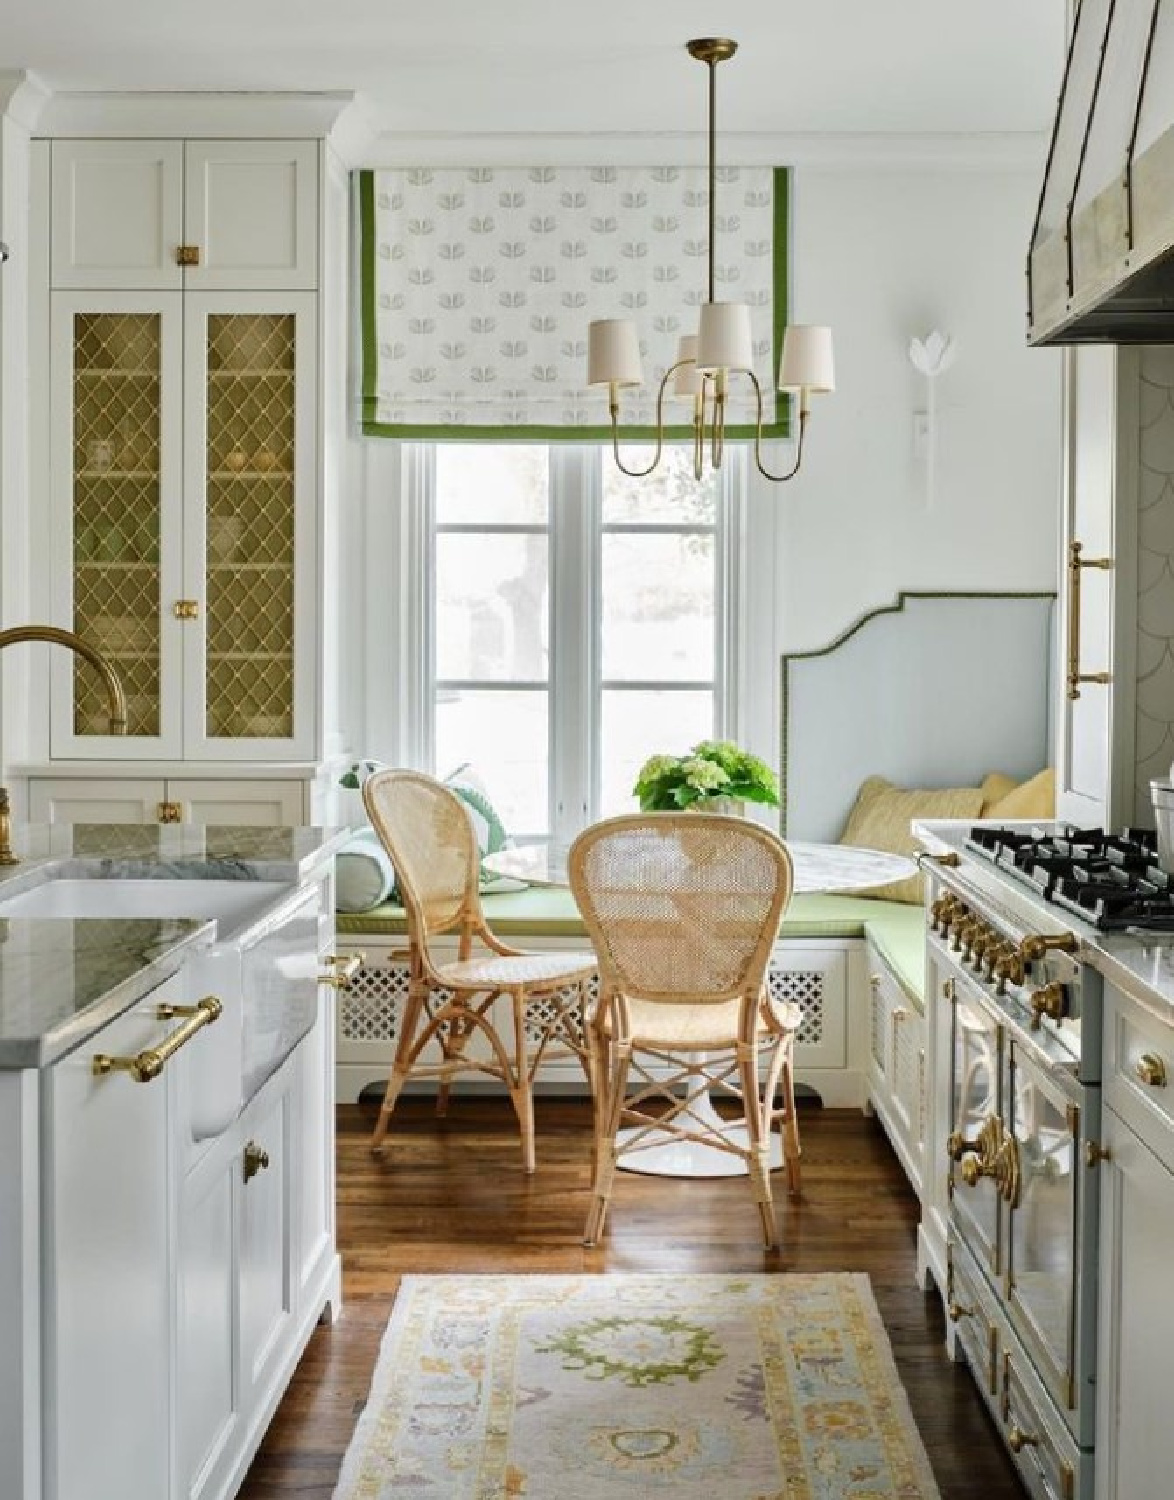 M. E. Beck Design - beautiful kitchen with breakfast nook in Maria E. Beck's 1931 renovated Texas home. #traditionalstyle #kitchendesign #bmwhitedove #timelesskitchen